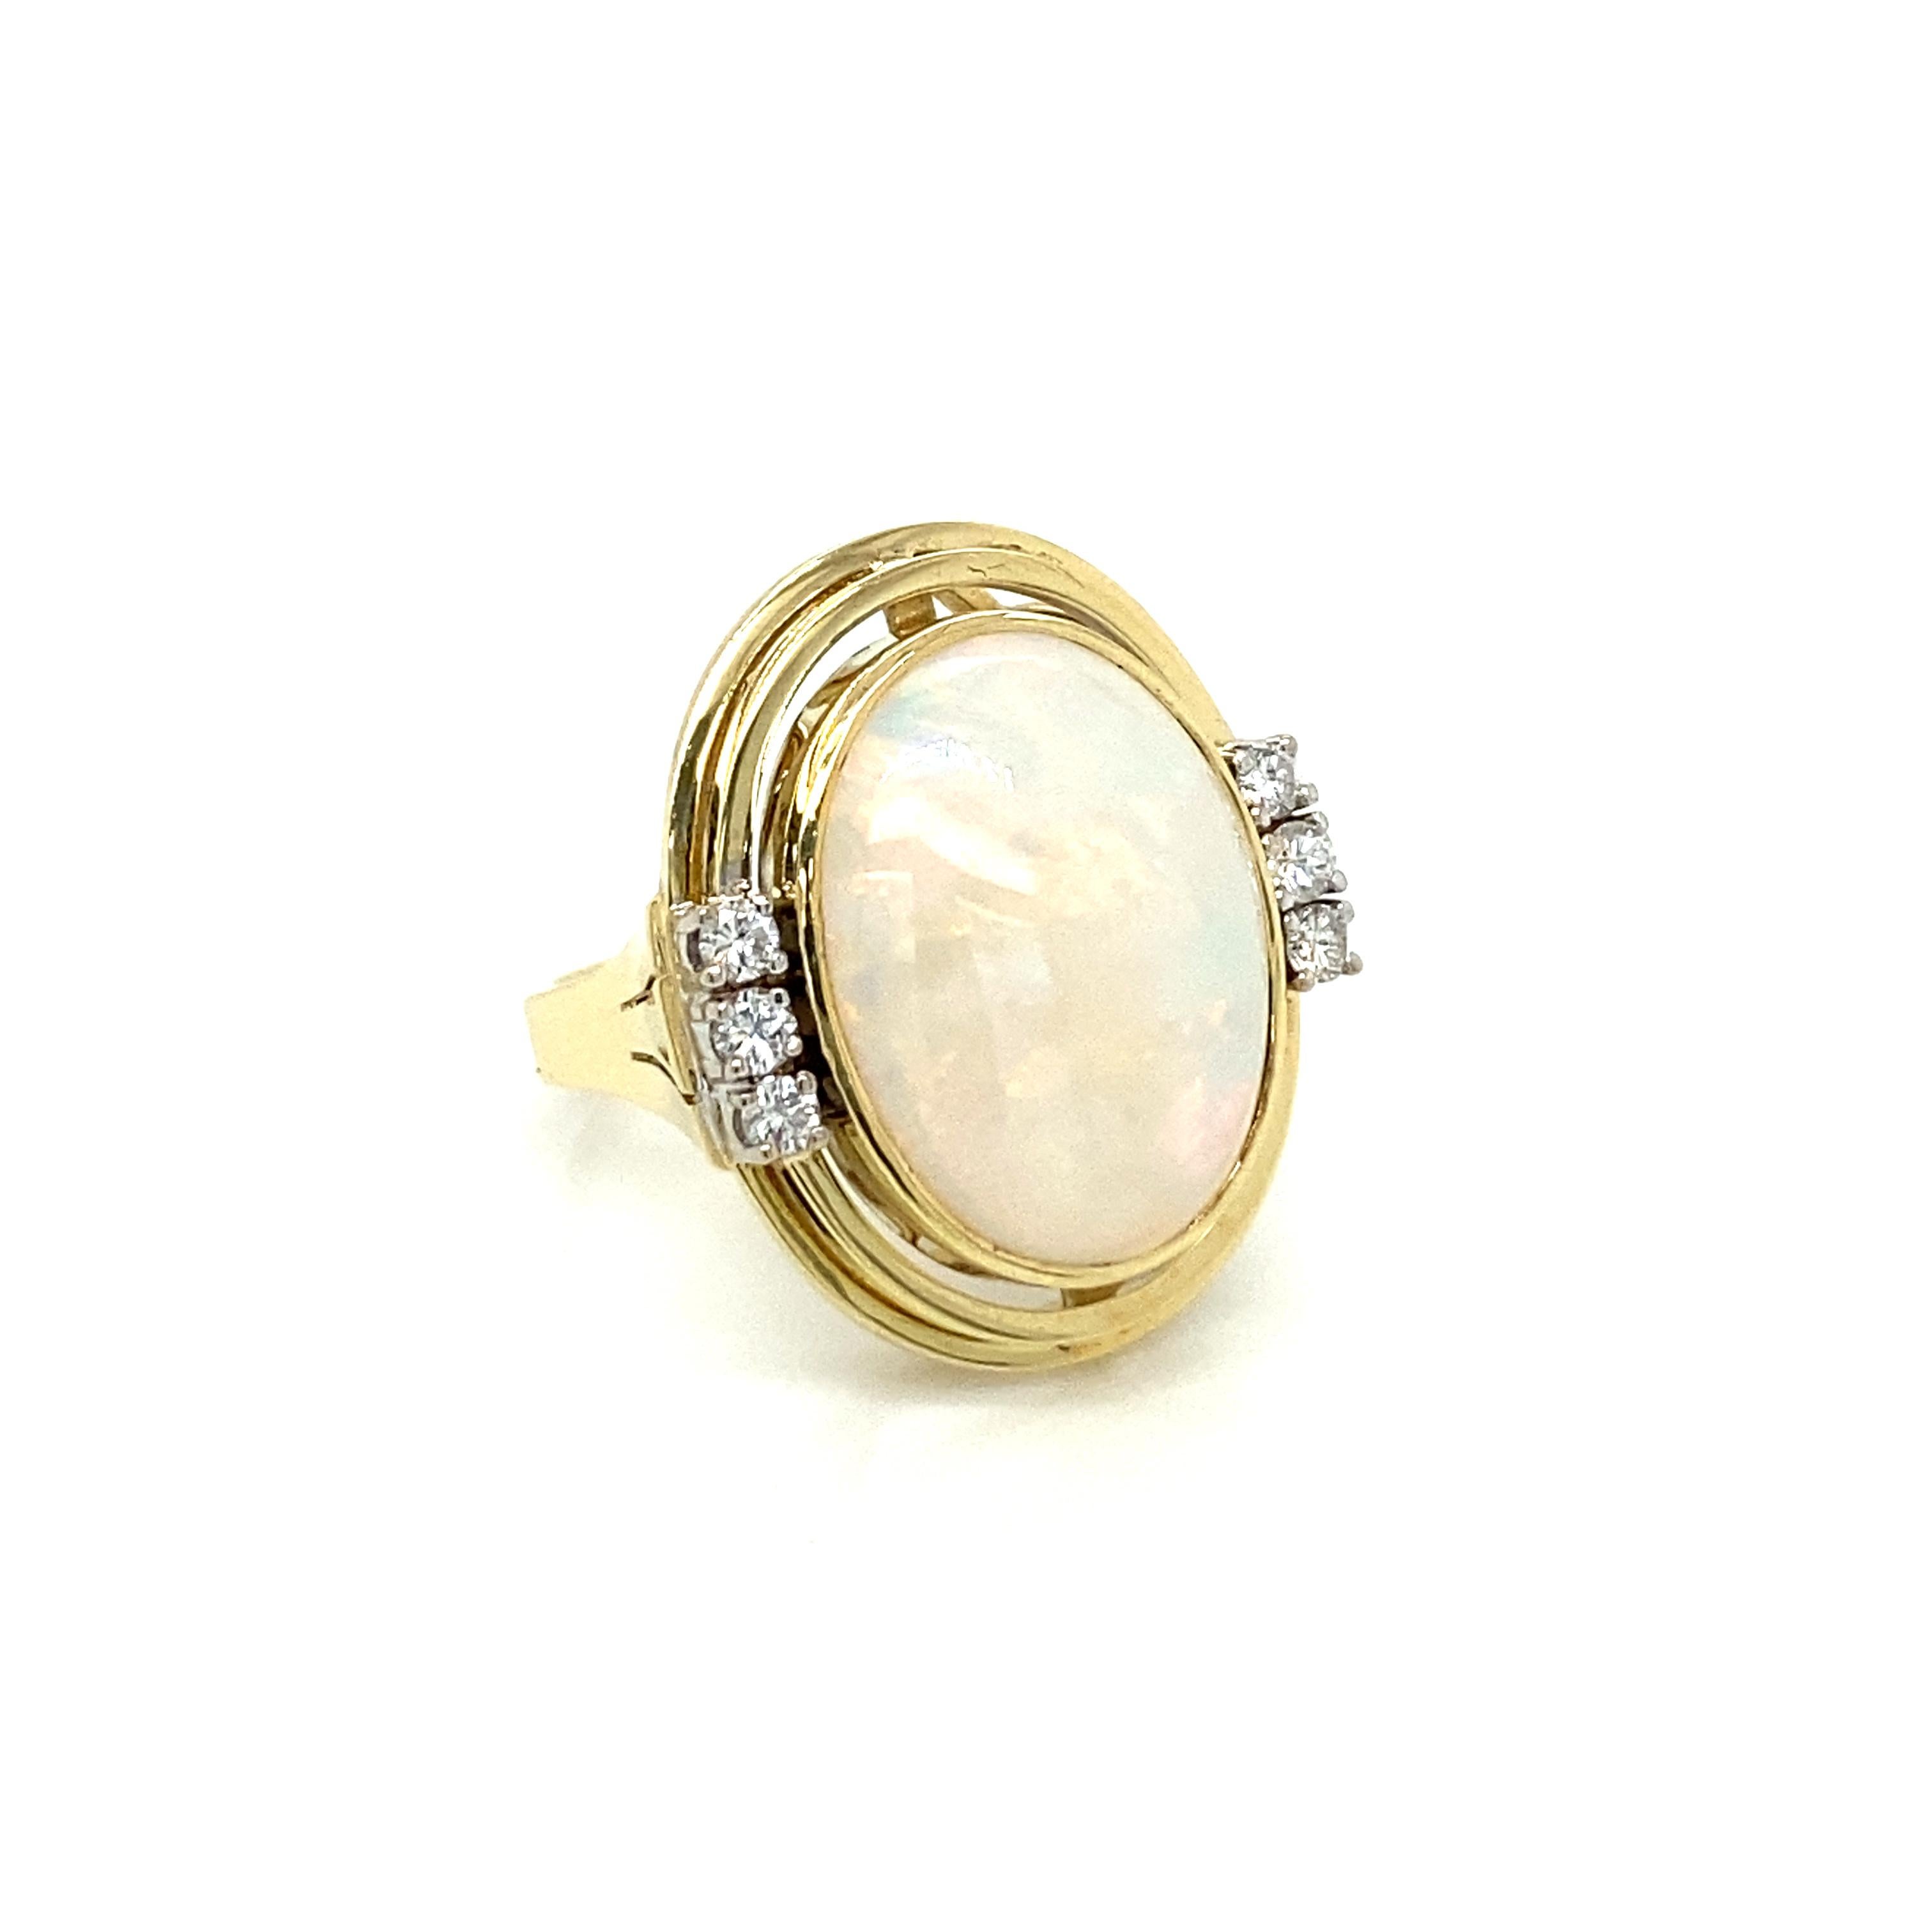 Beautiful and elegant ring, handmade in solid 14k yellow gold, dates 1970' Italy, It features in the center a large great quality Opal surrounded by three sparkling round brilliant cut diamonds on each side.
Excellent condition

CONDITION: Pre-Owned